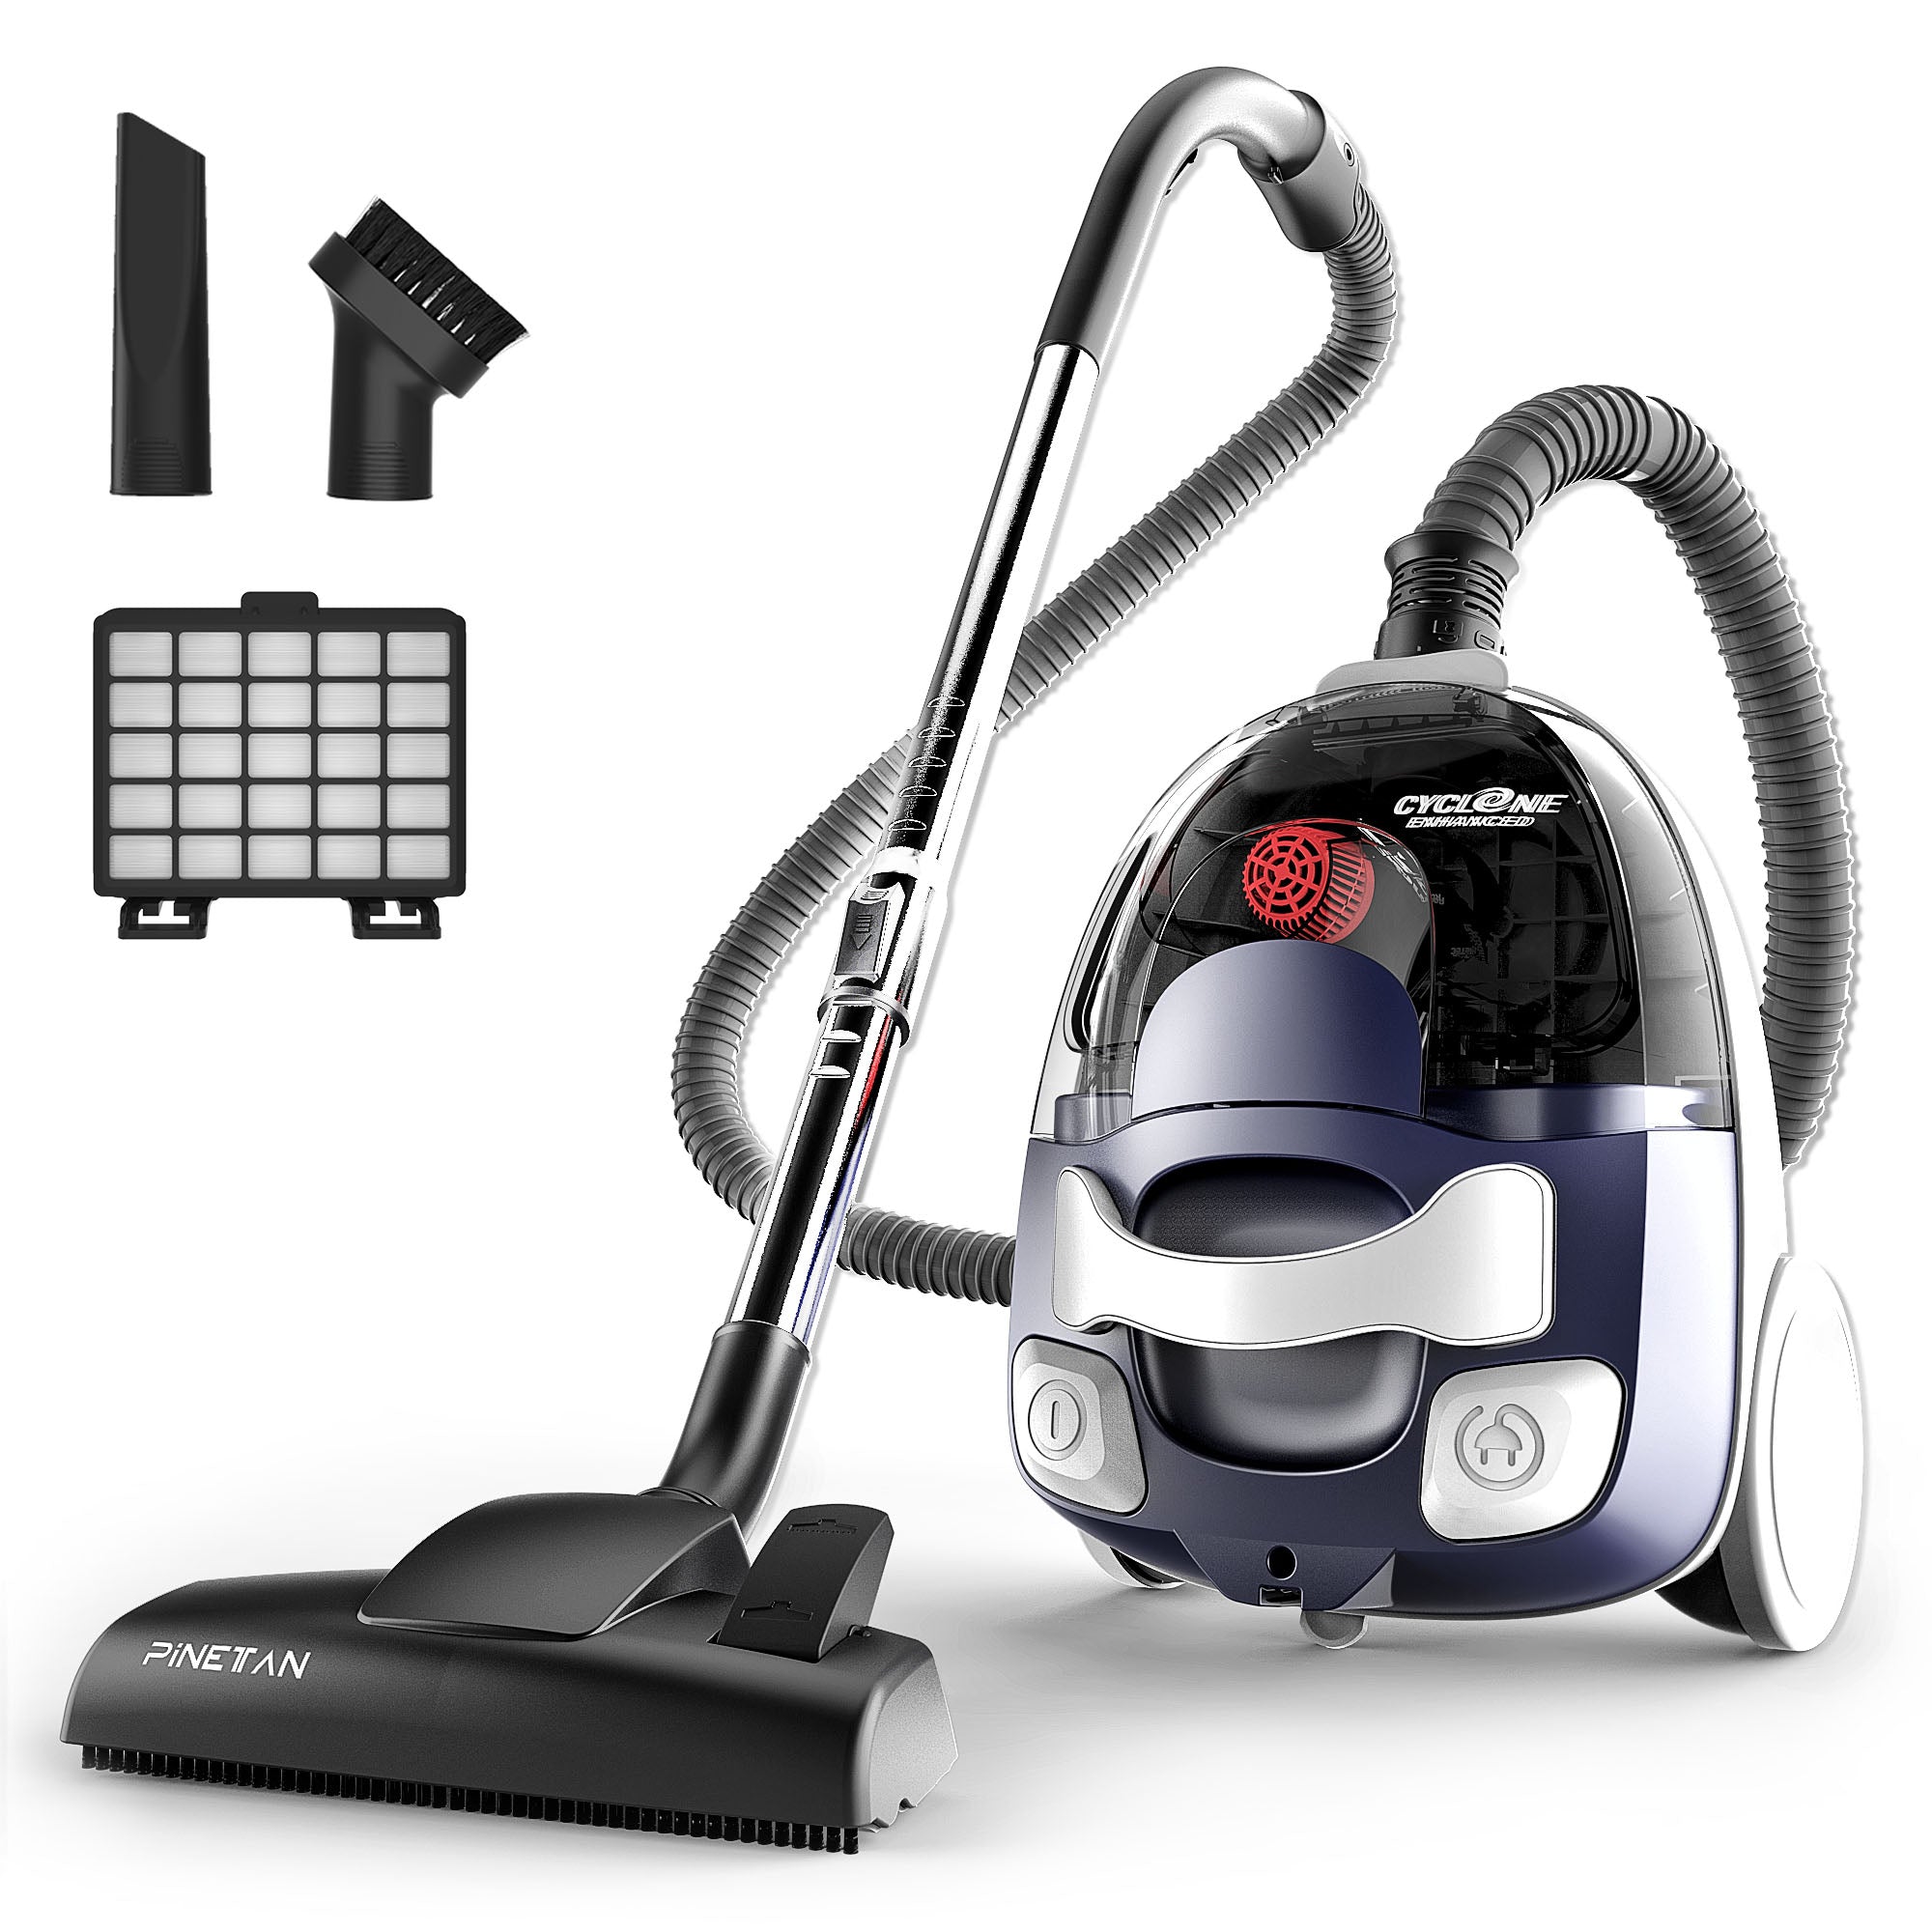 DoubleDown - Bagless Canister Vacuum Cleaner, Corded 800W